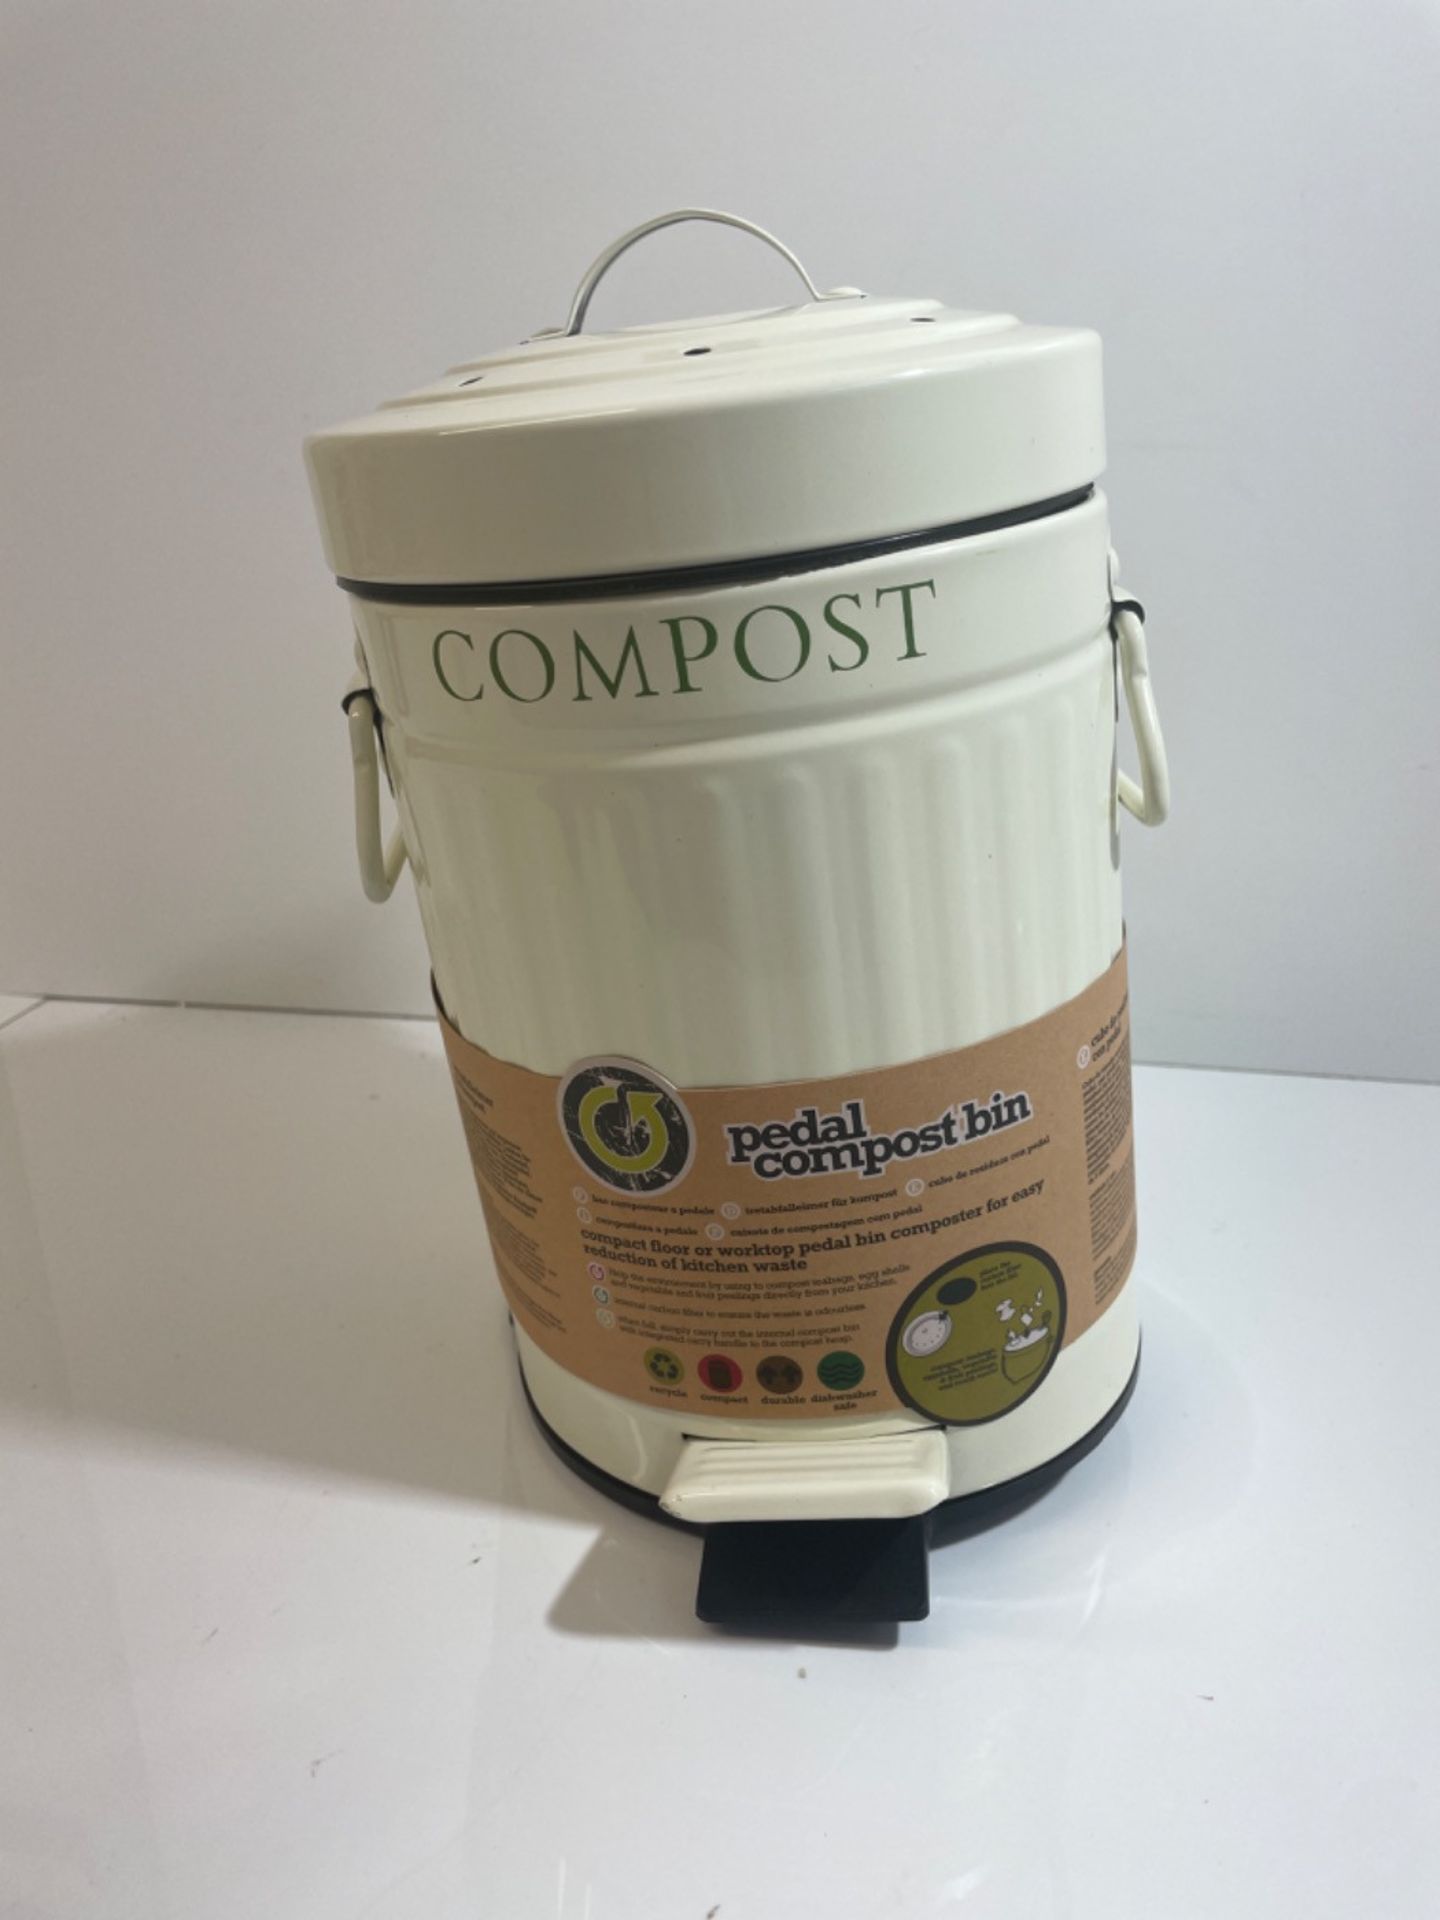 KitchenCraft KCCOMPBIN Kitchen Compost Bin with Pedal, Metal, 3 Litre, Cream - Image 2 of 3